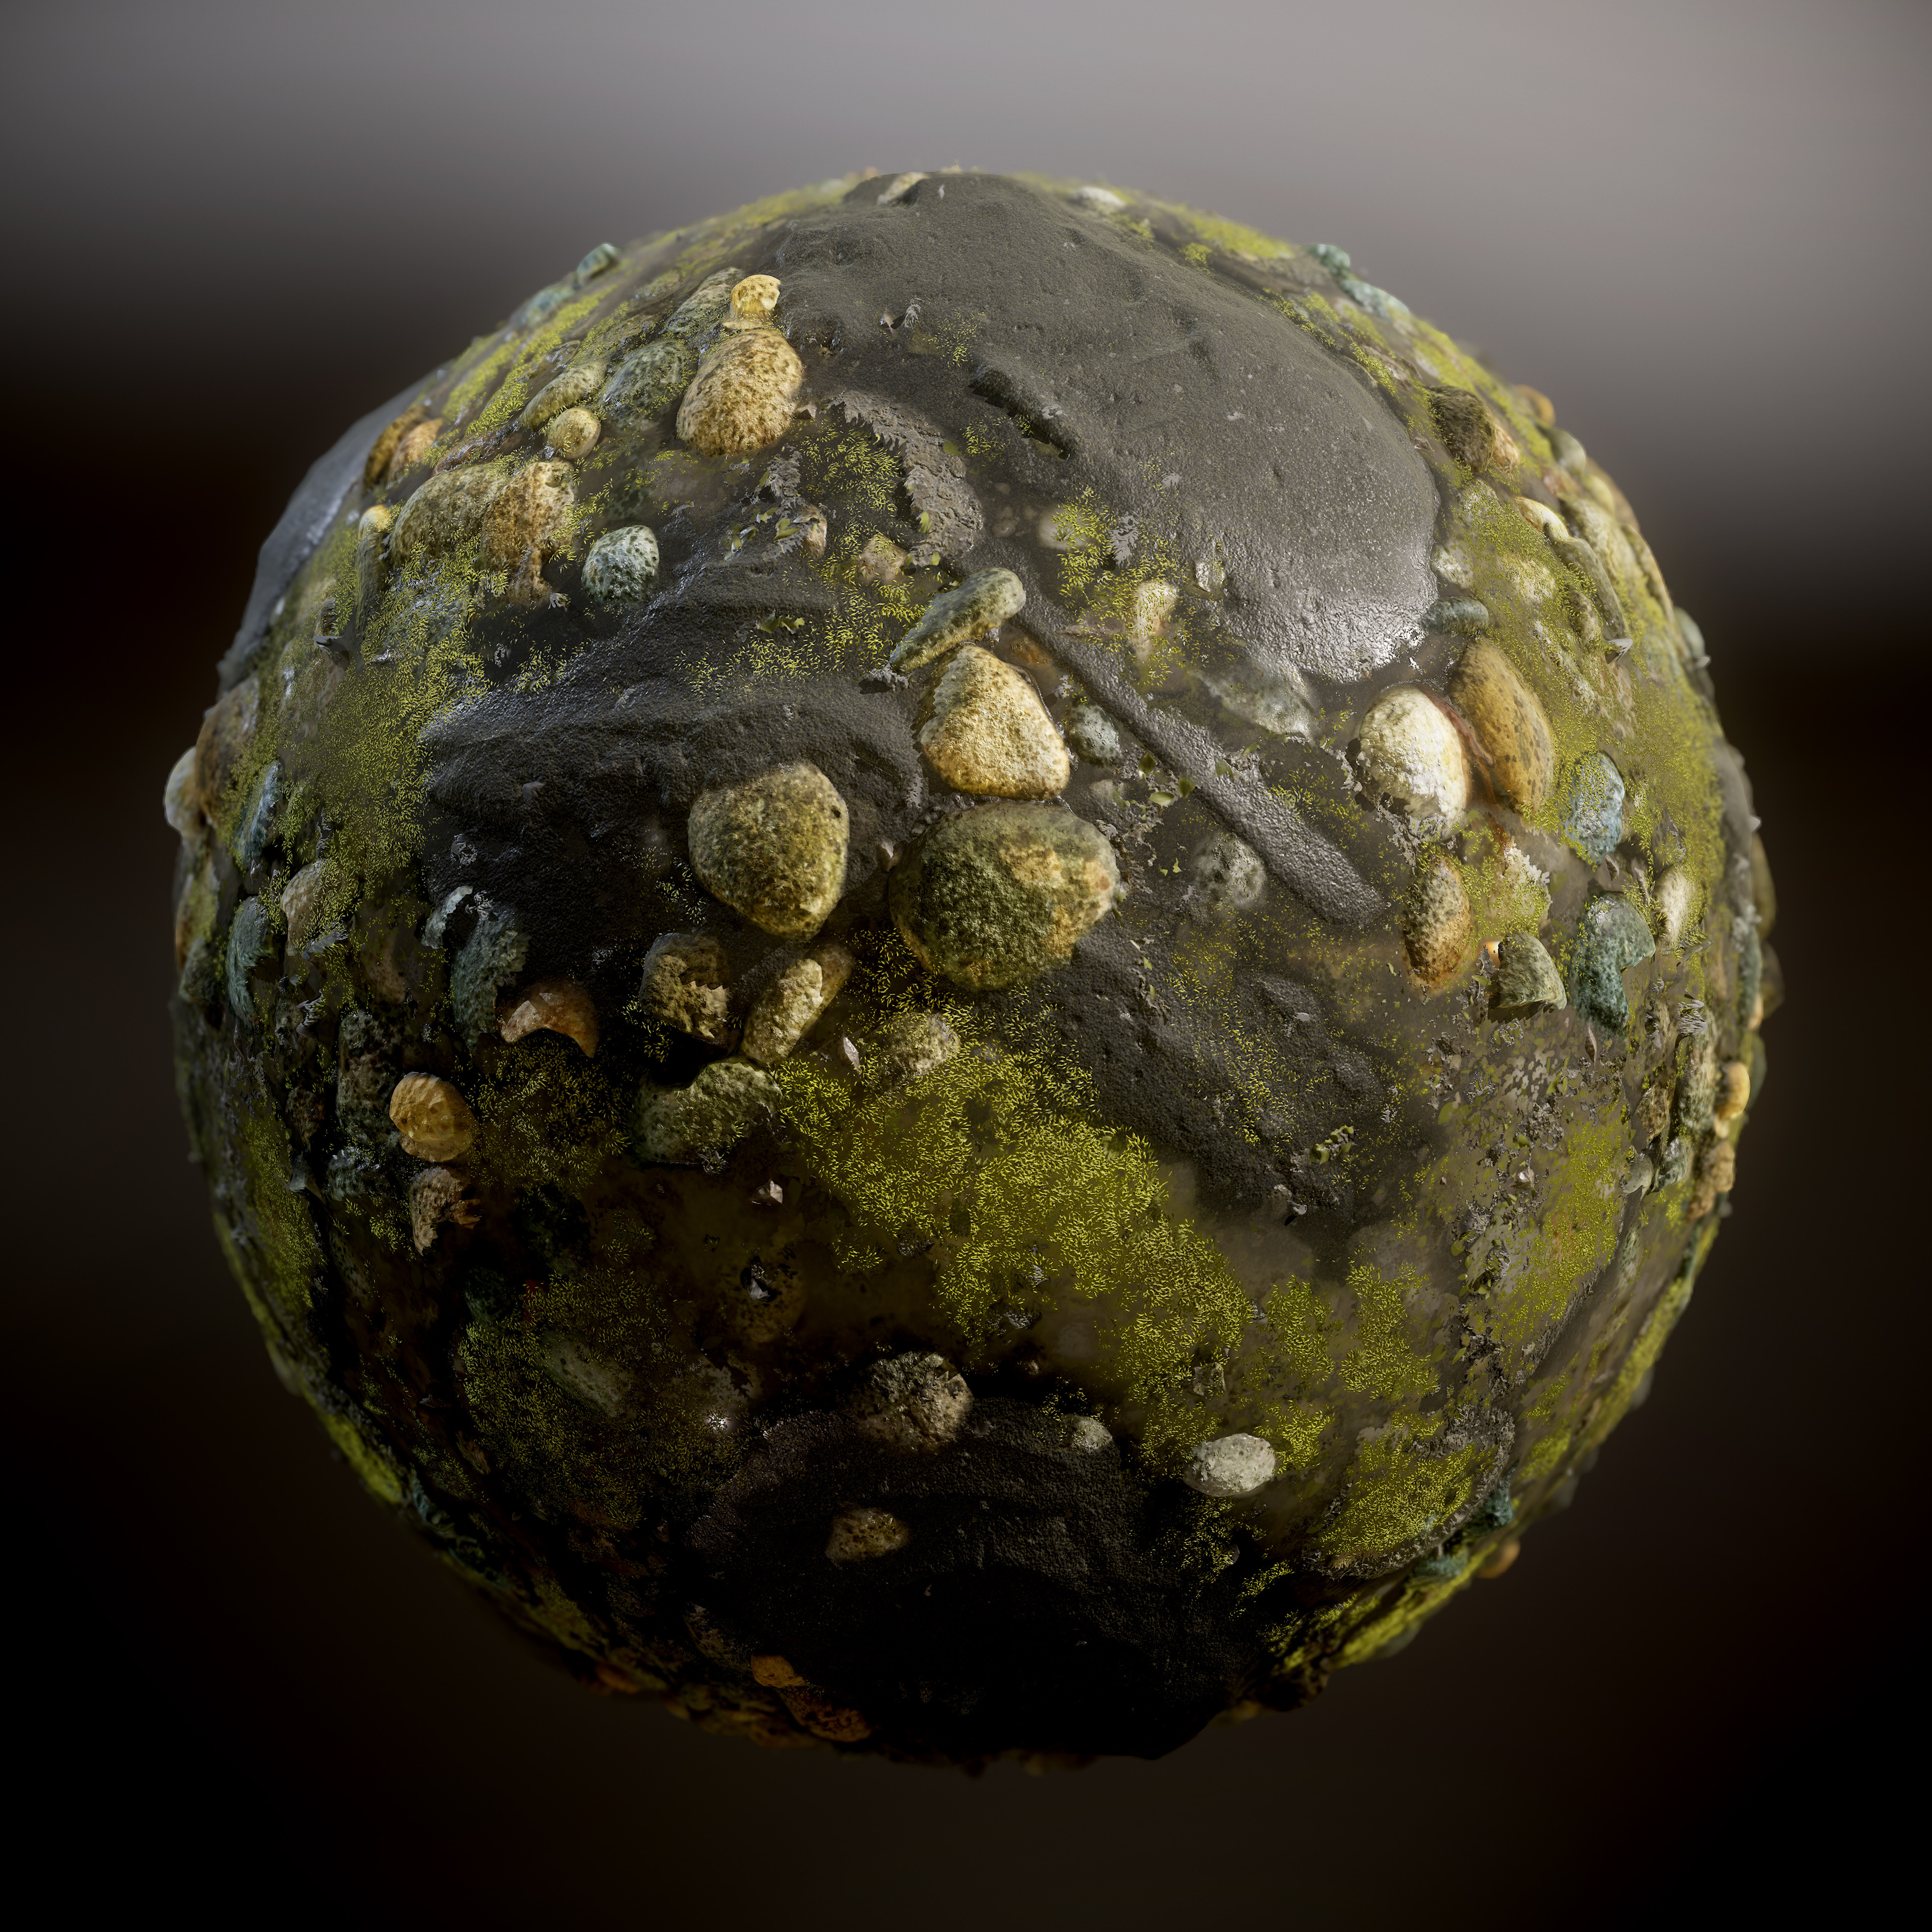 A blended Material that uses Photogrammetric Scans as a base material that is then blended with other Substance Materials.